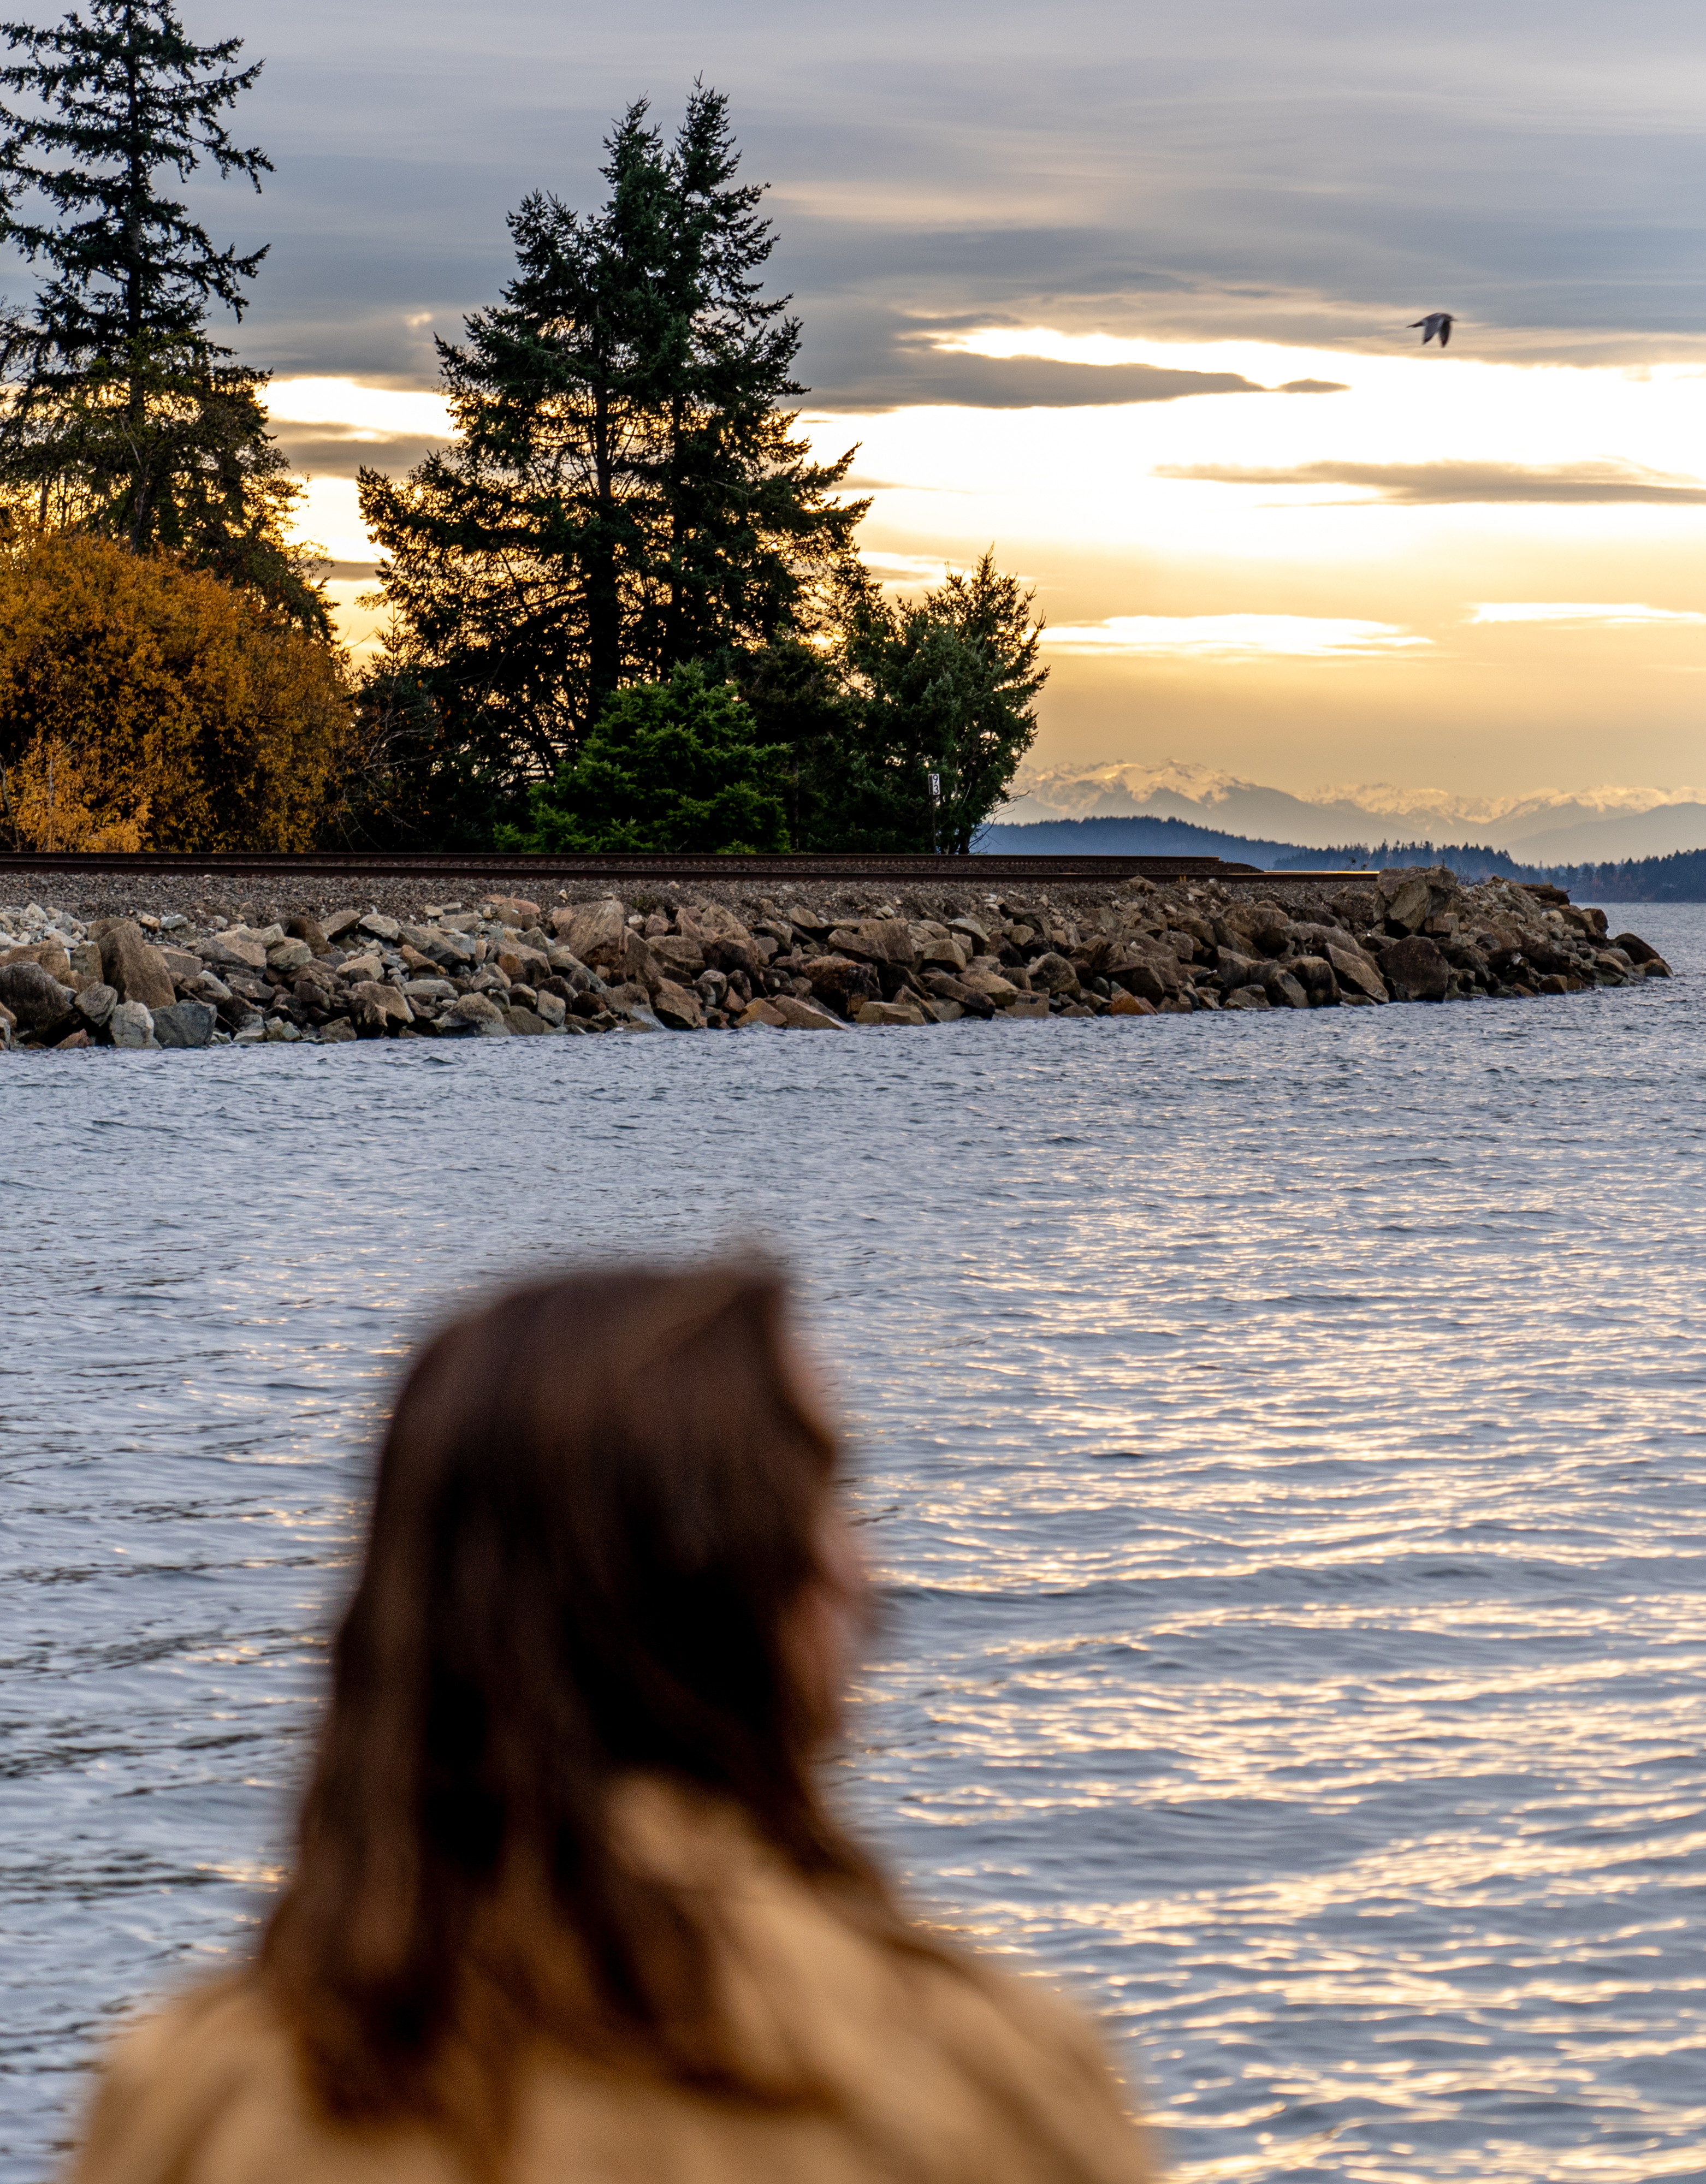 A bird soars overhead as Caitlyn Blair, seen from behind, looks out over Bellingham Bay